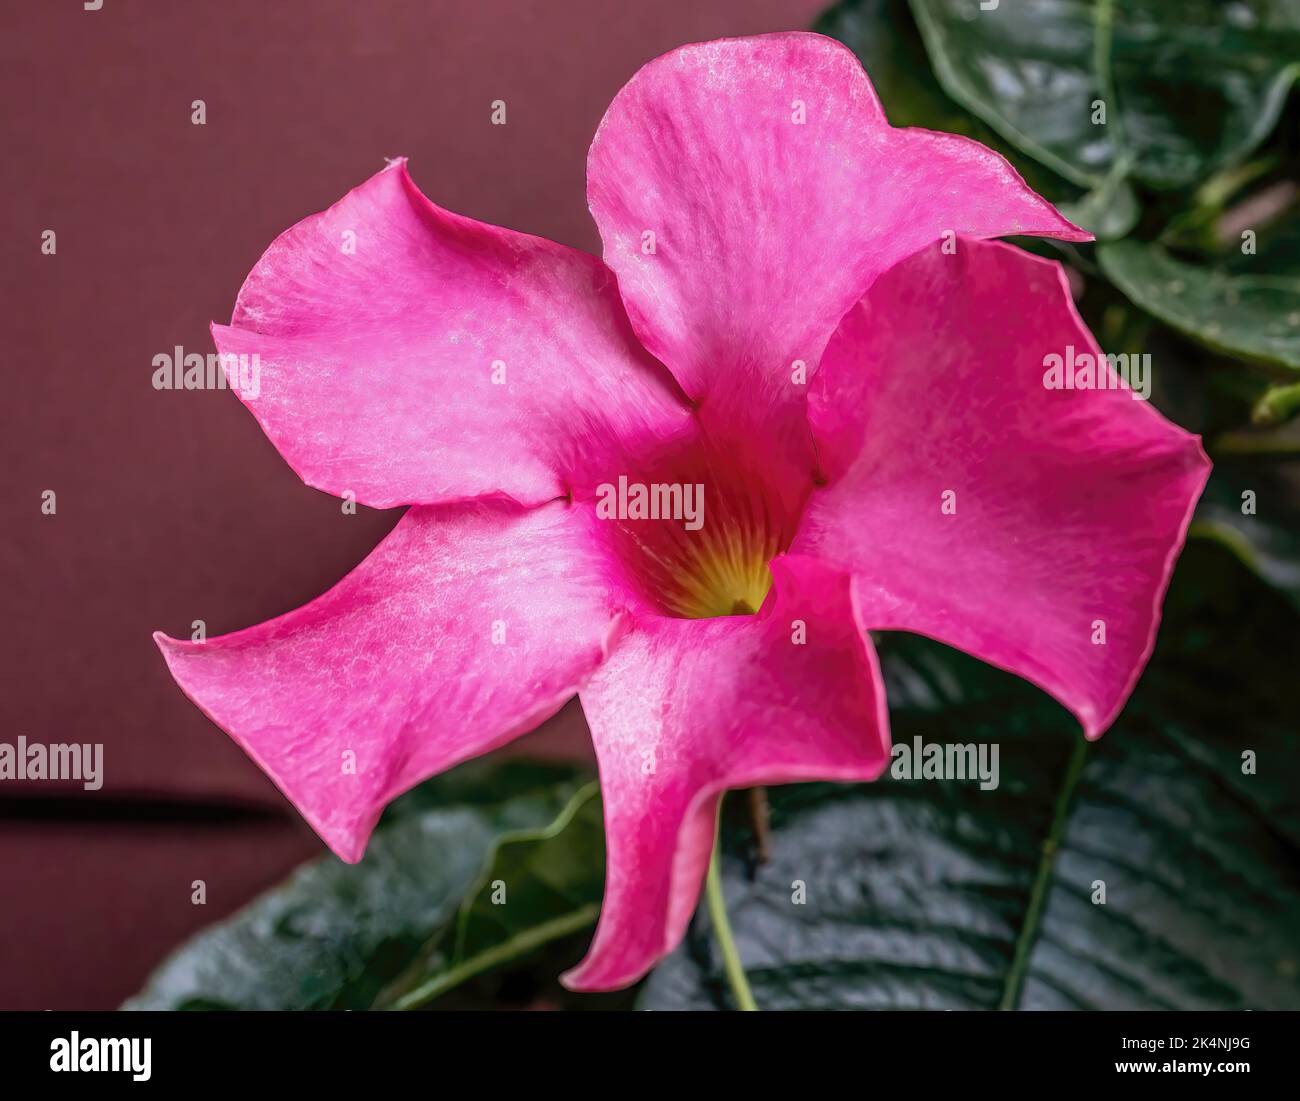 Closeup of a large bright pink mandevilla blossom growing on a vine on a late summer day in St. Croix Falls, Wisconsin USA. Stock Photo